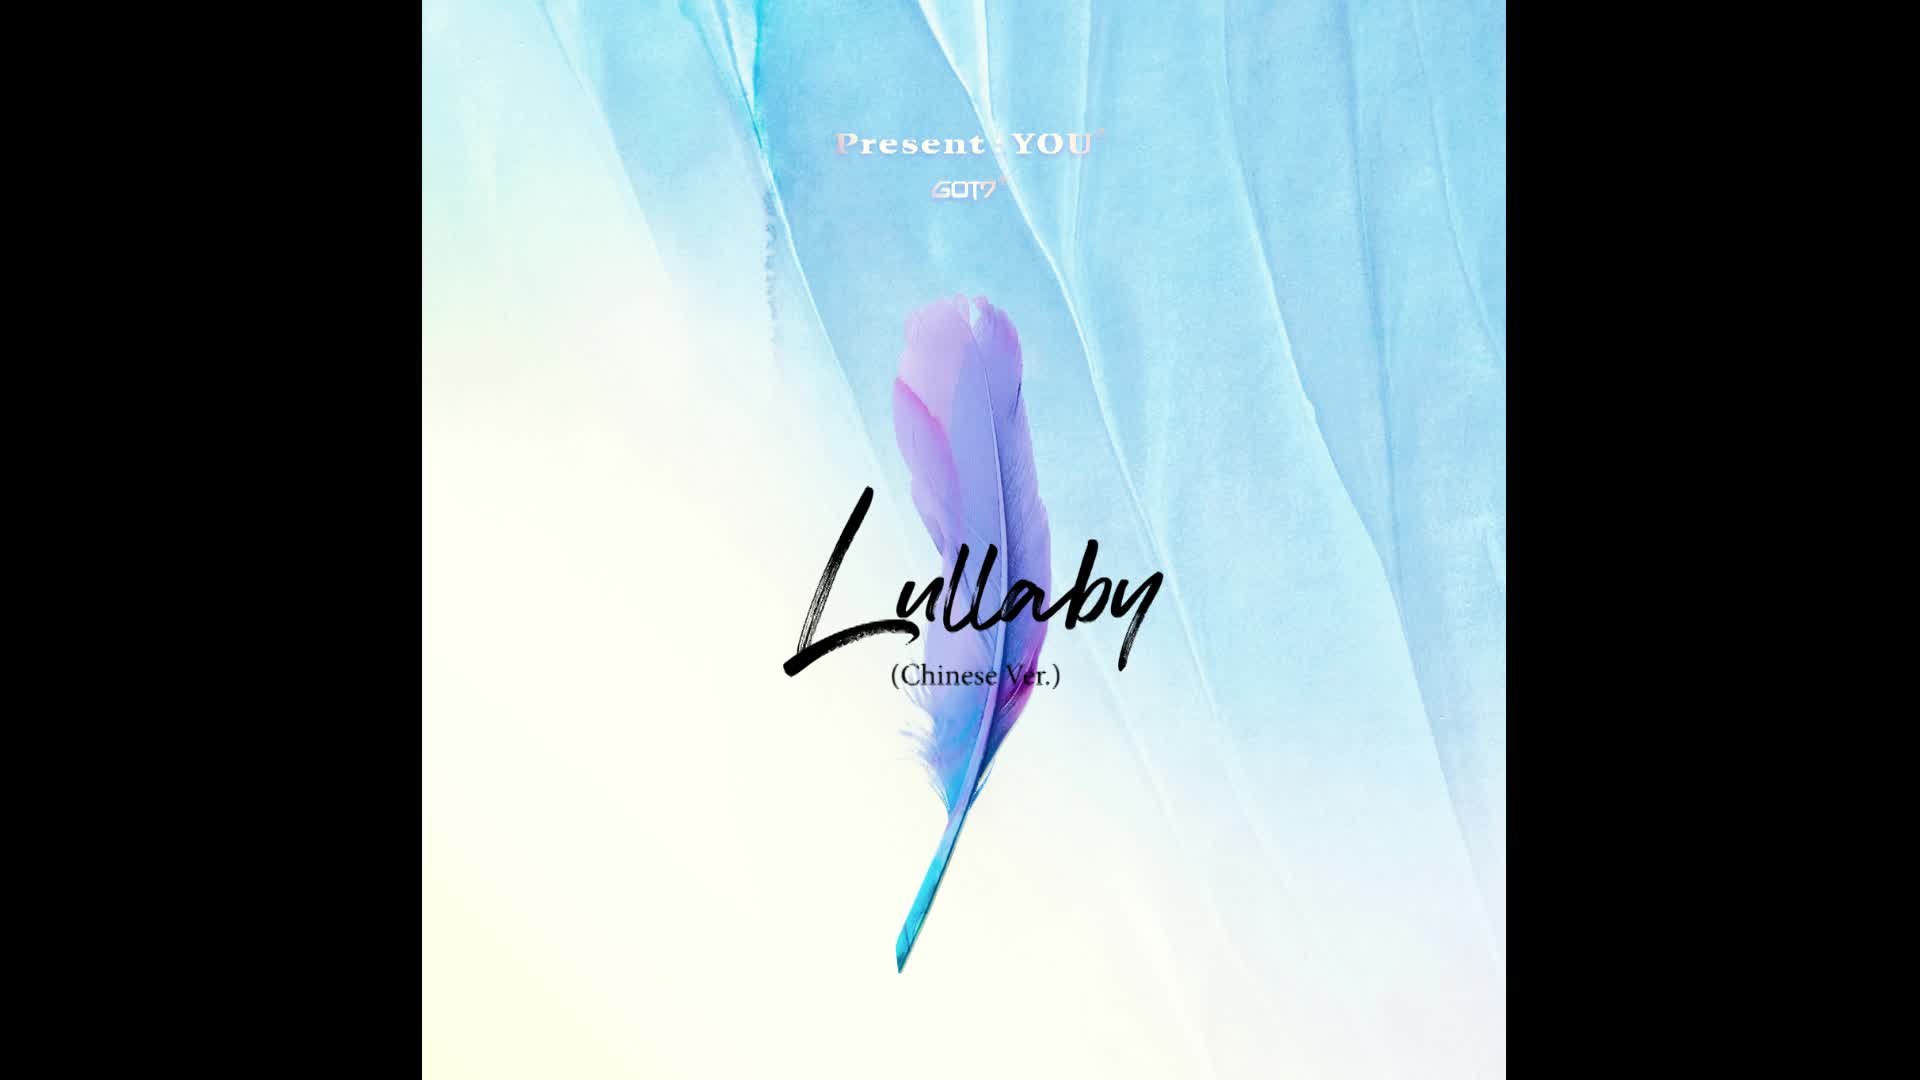 GOT7(갓세븐) "Lullaby" (Chinese Ver.) Track Spoiler